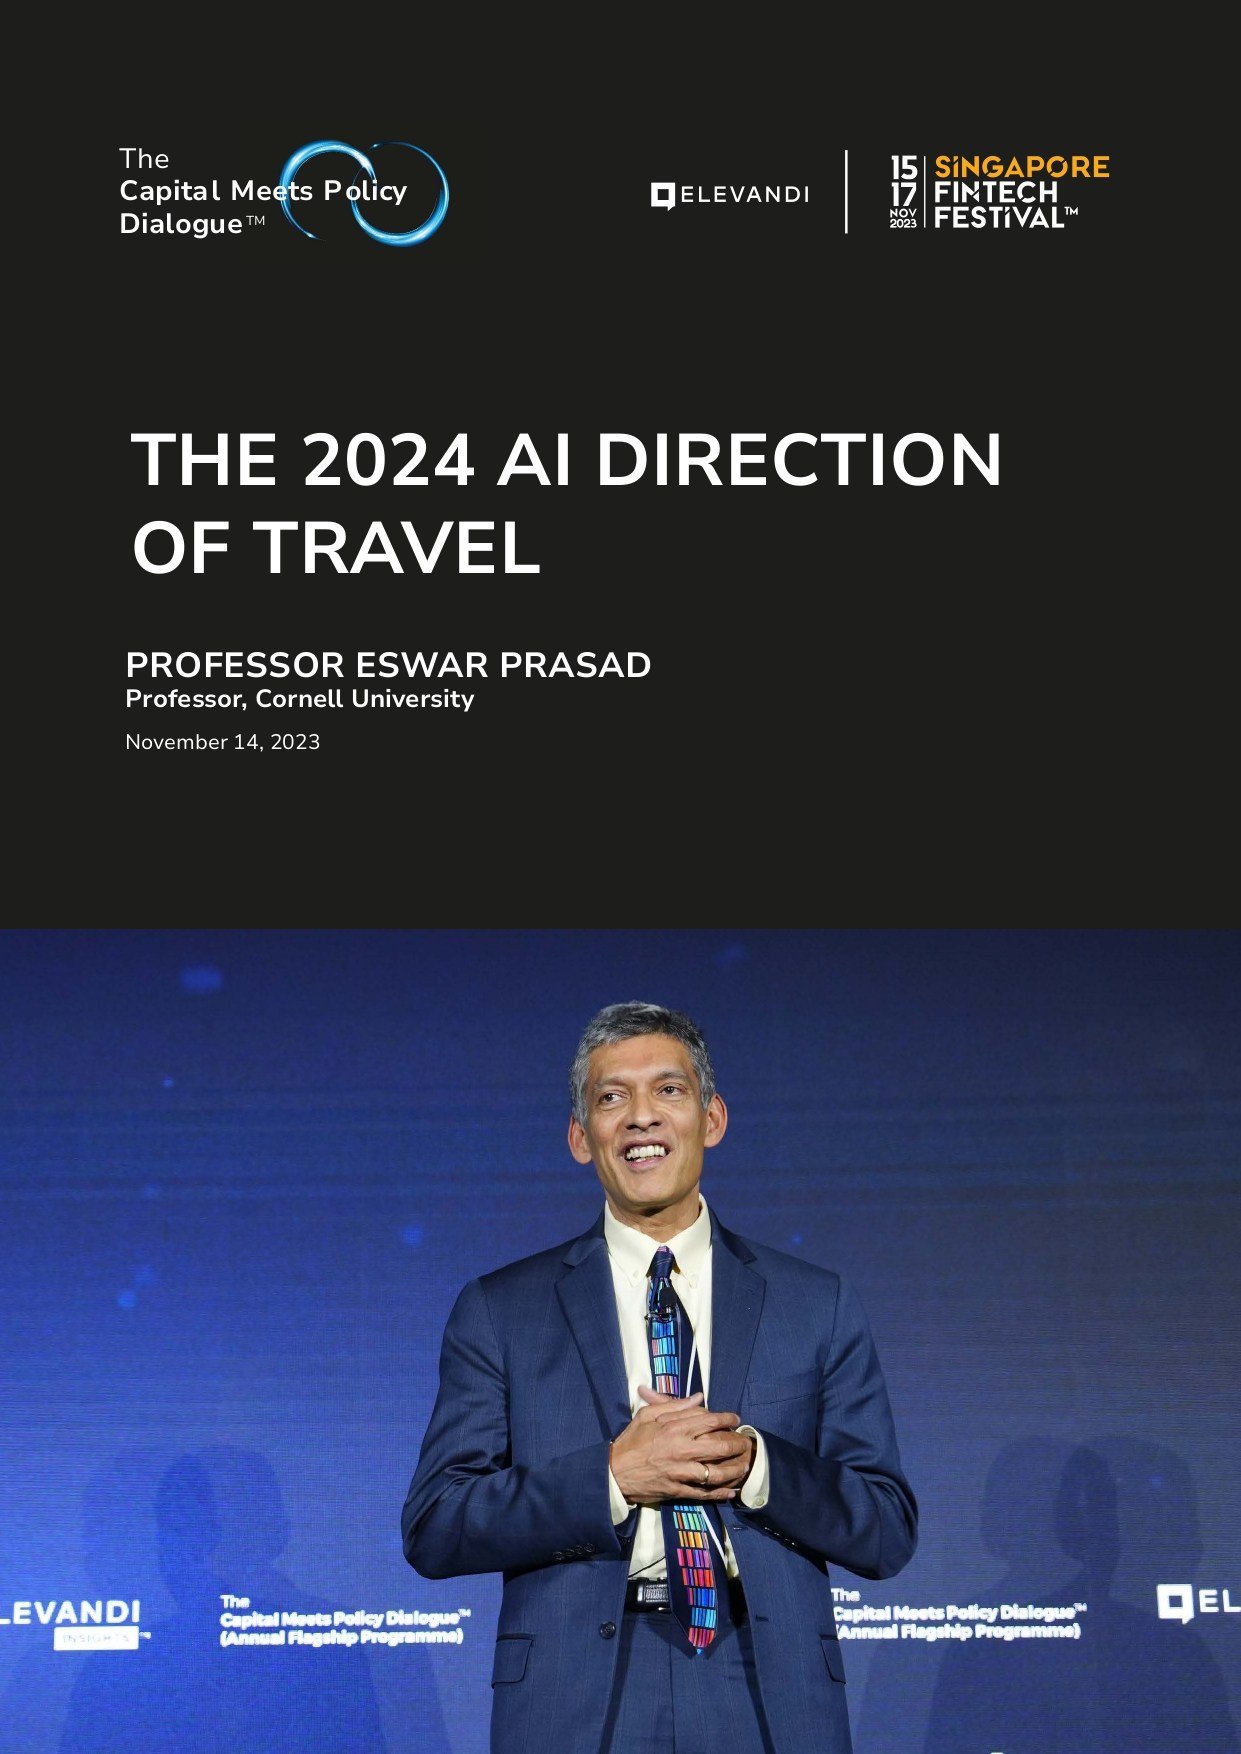 Elevandi_Insights Report_CMPD_The 2024 AI direction of travel_-1